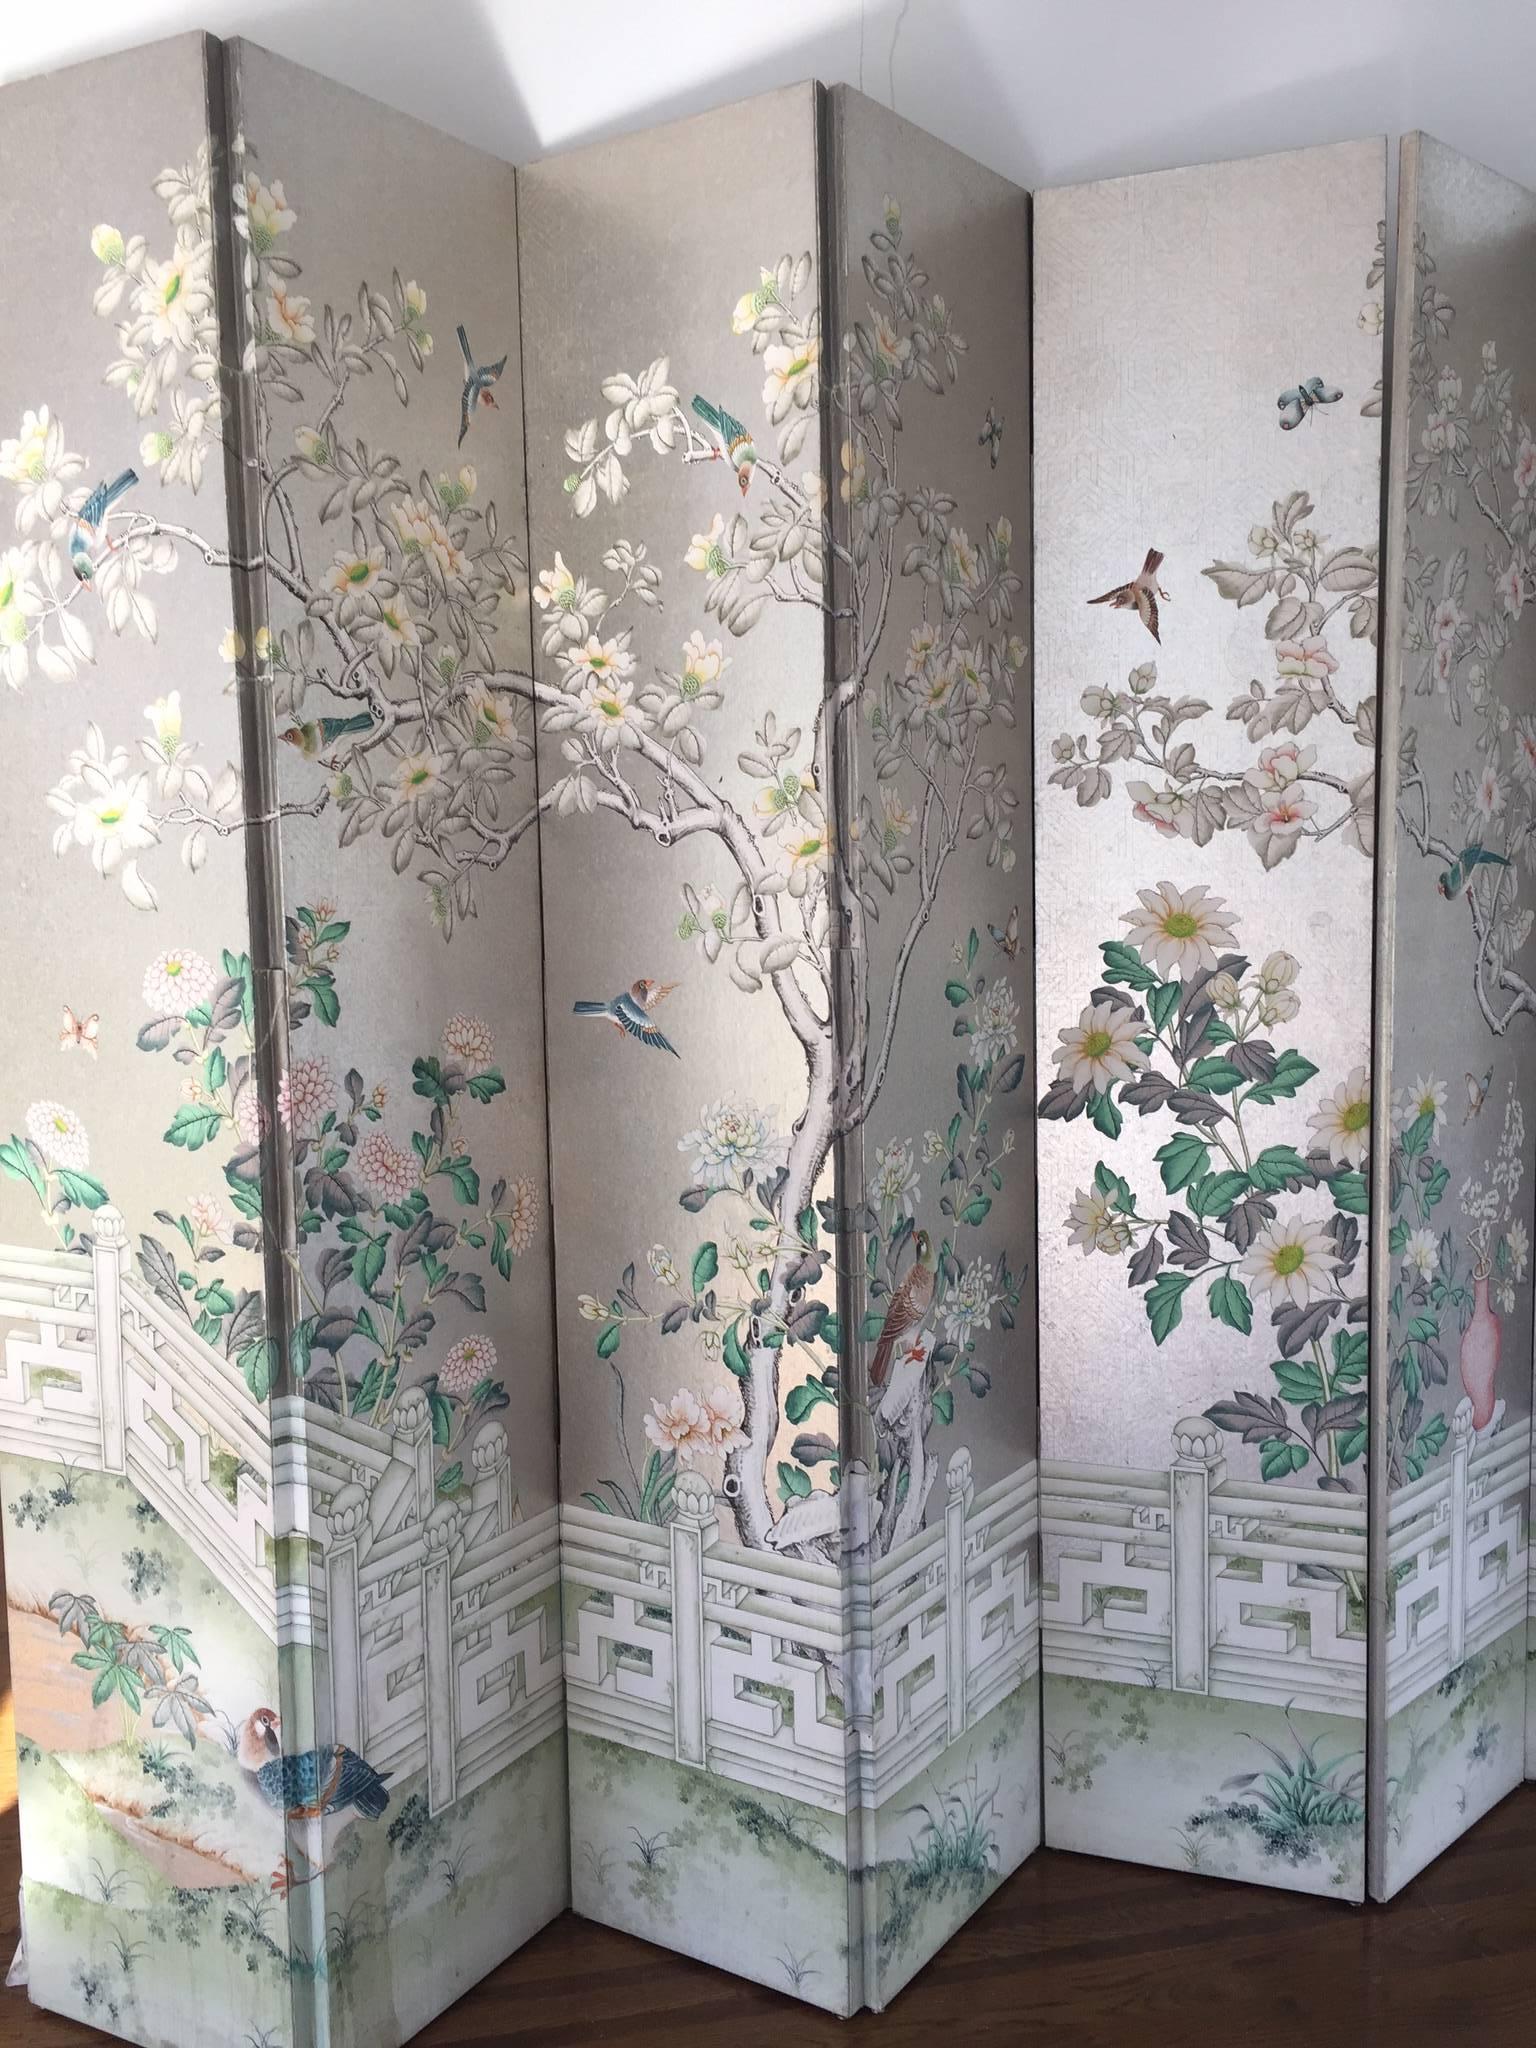 A breathtakingly tall five-panel super glamorous screen, hand-painted with metallic silver background and adorned with an Asian inspired garden scene having foliage, birds, butterflies and lattice fence at the bottom.
Each panel is 92 H x 17.5